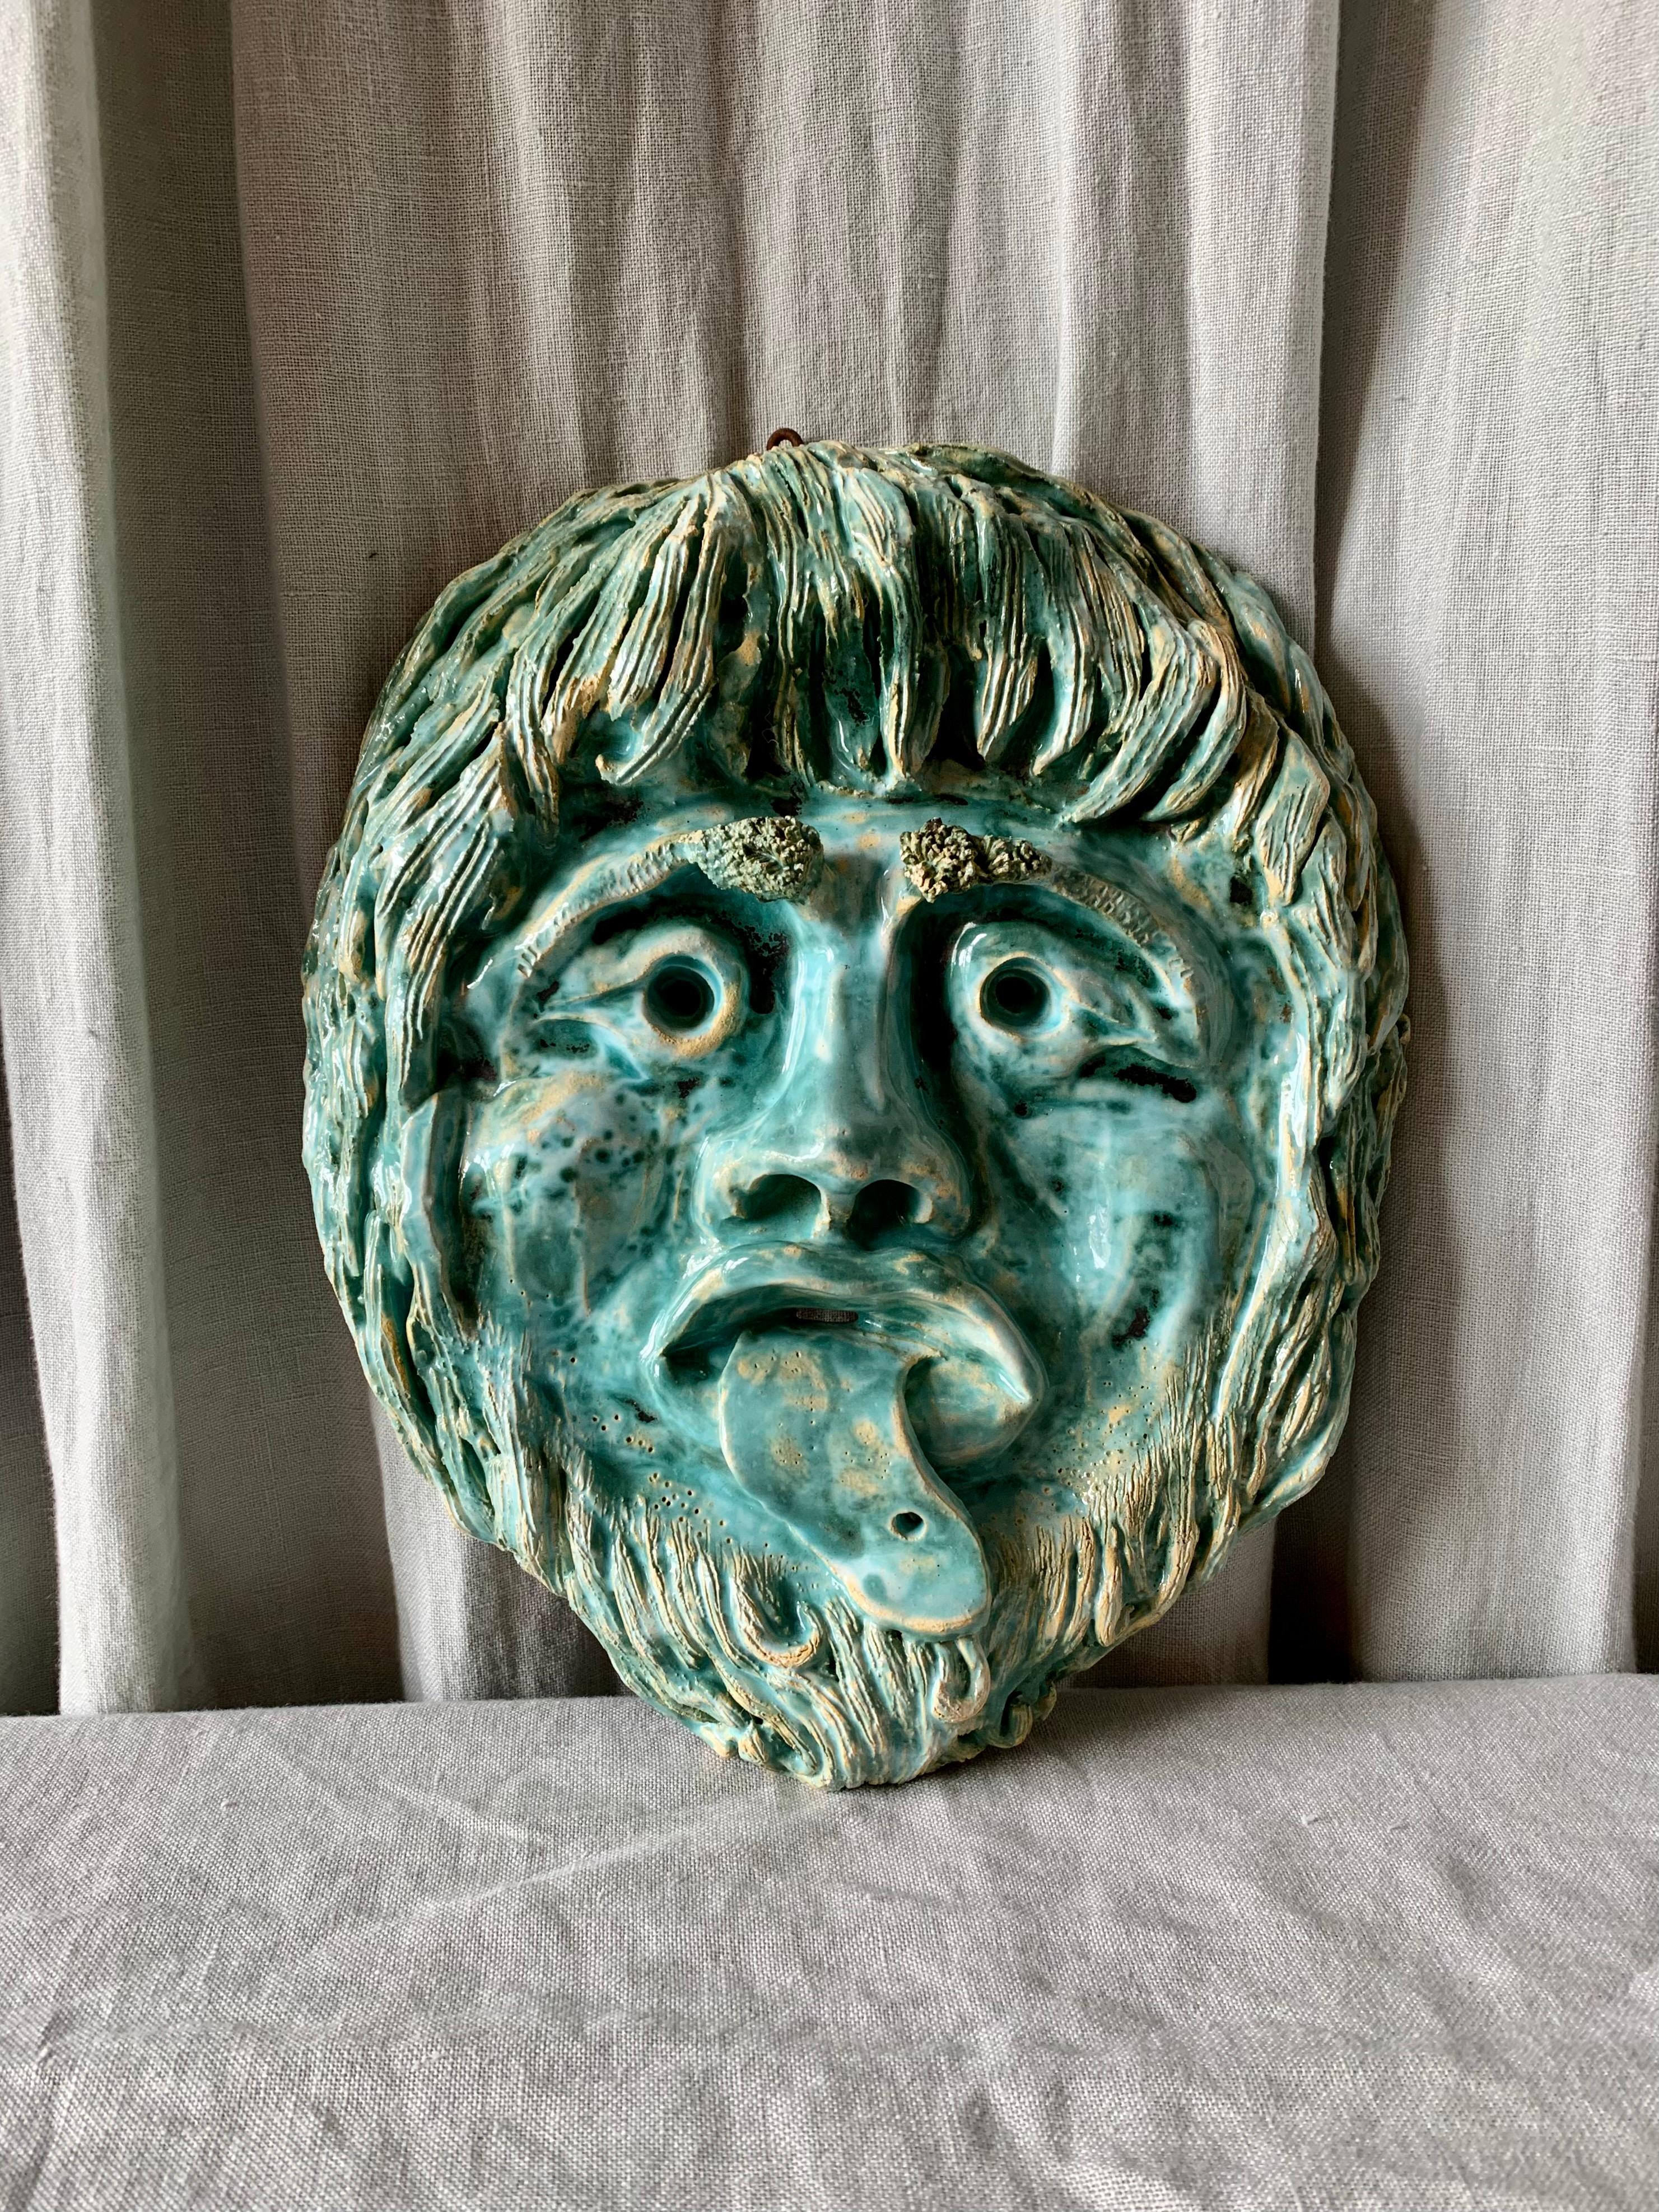 Vintage French ceramic mask with a dramatic face expression - for wall hanging. Lovely watercolorlike blue and green nuances.  

